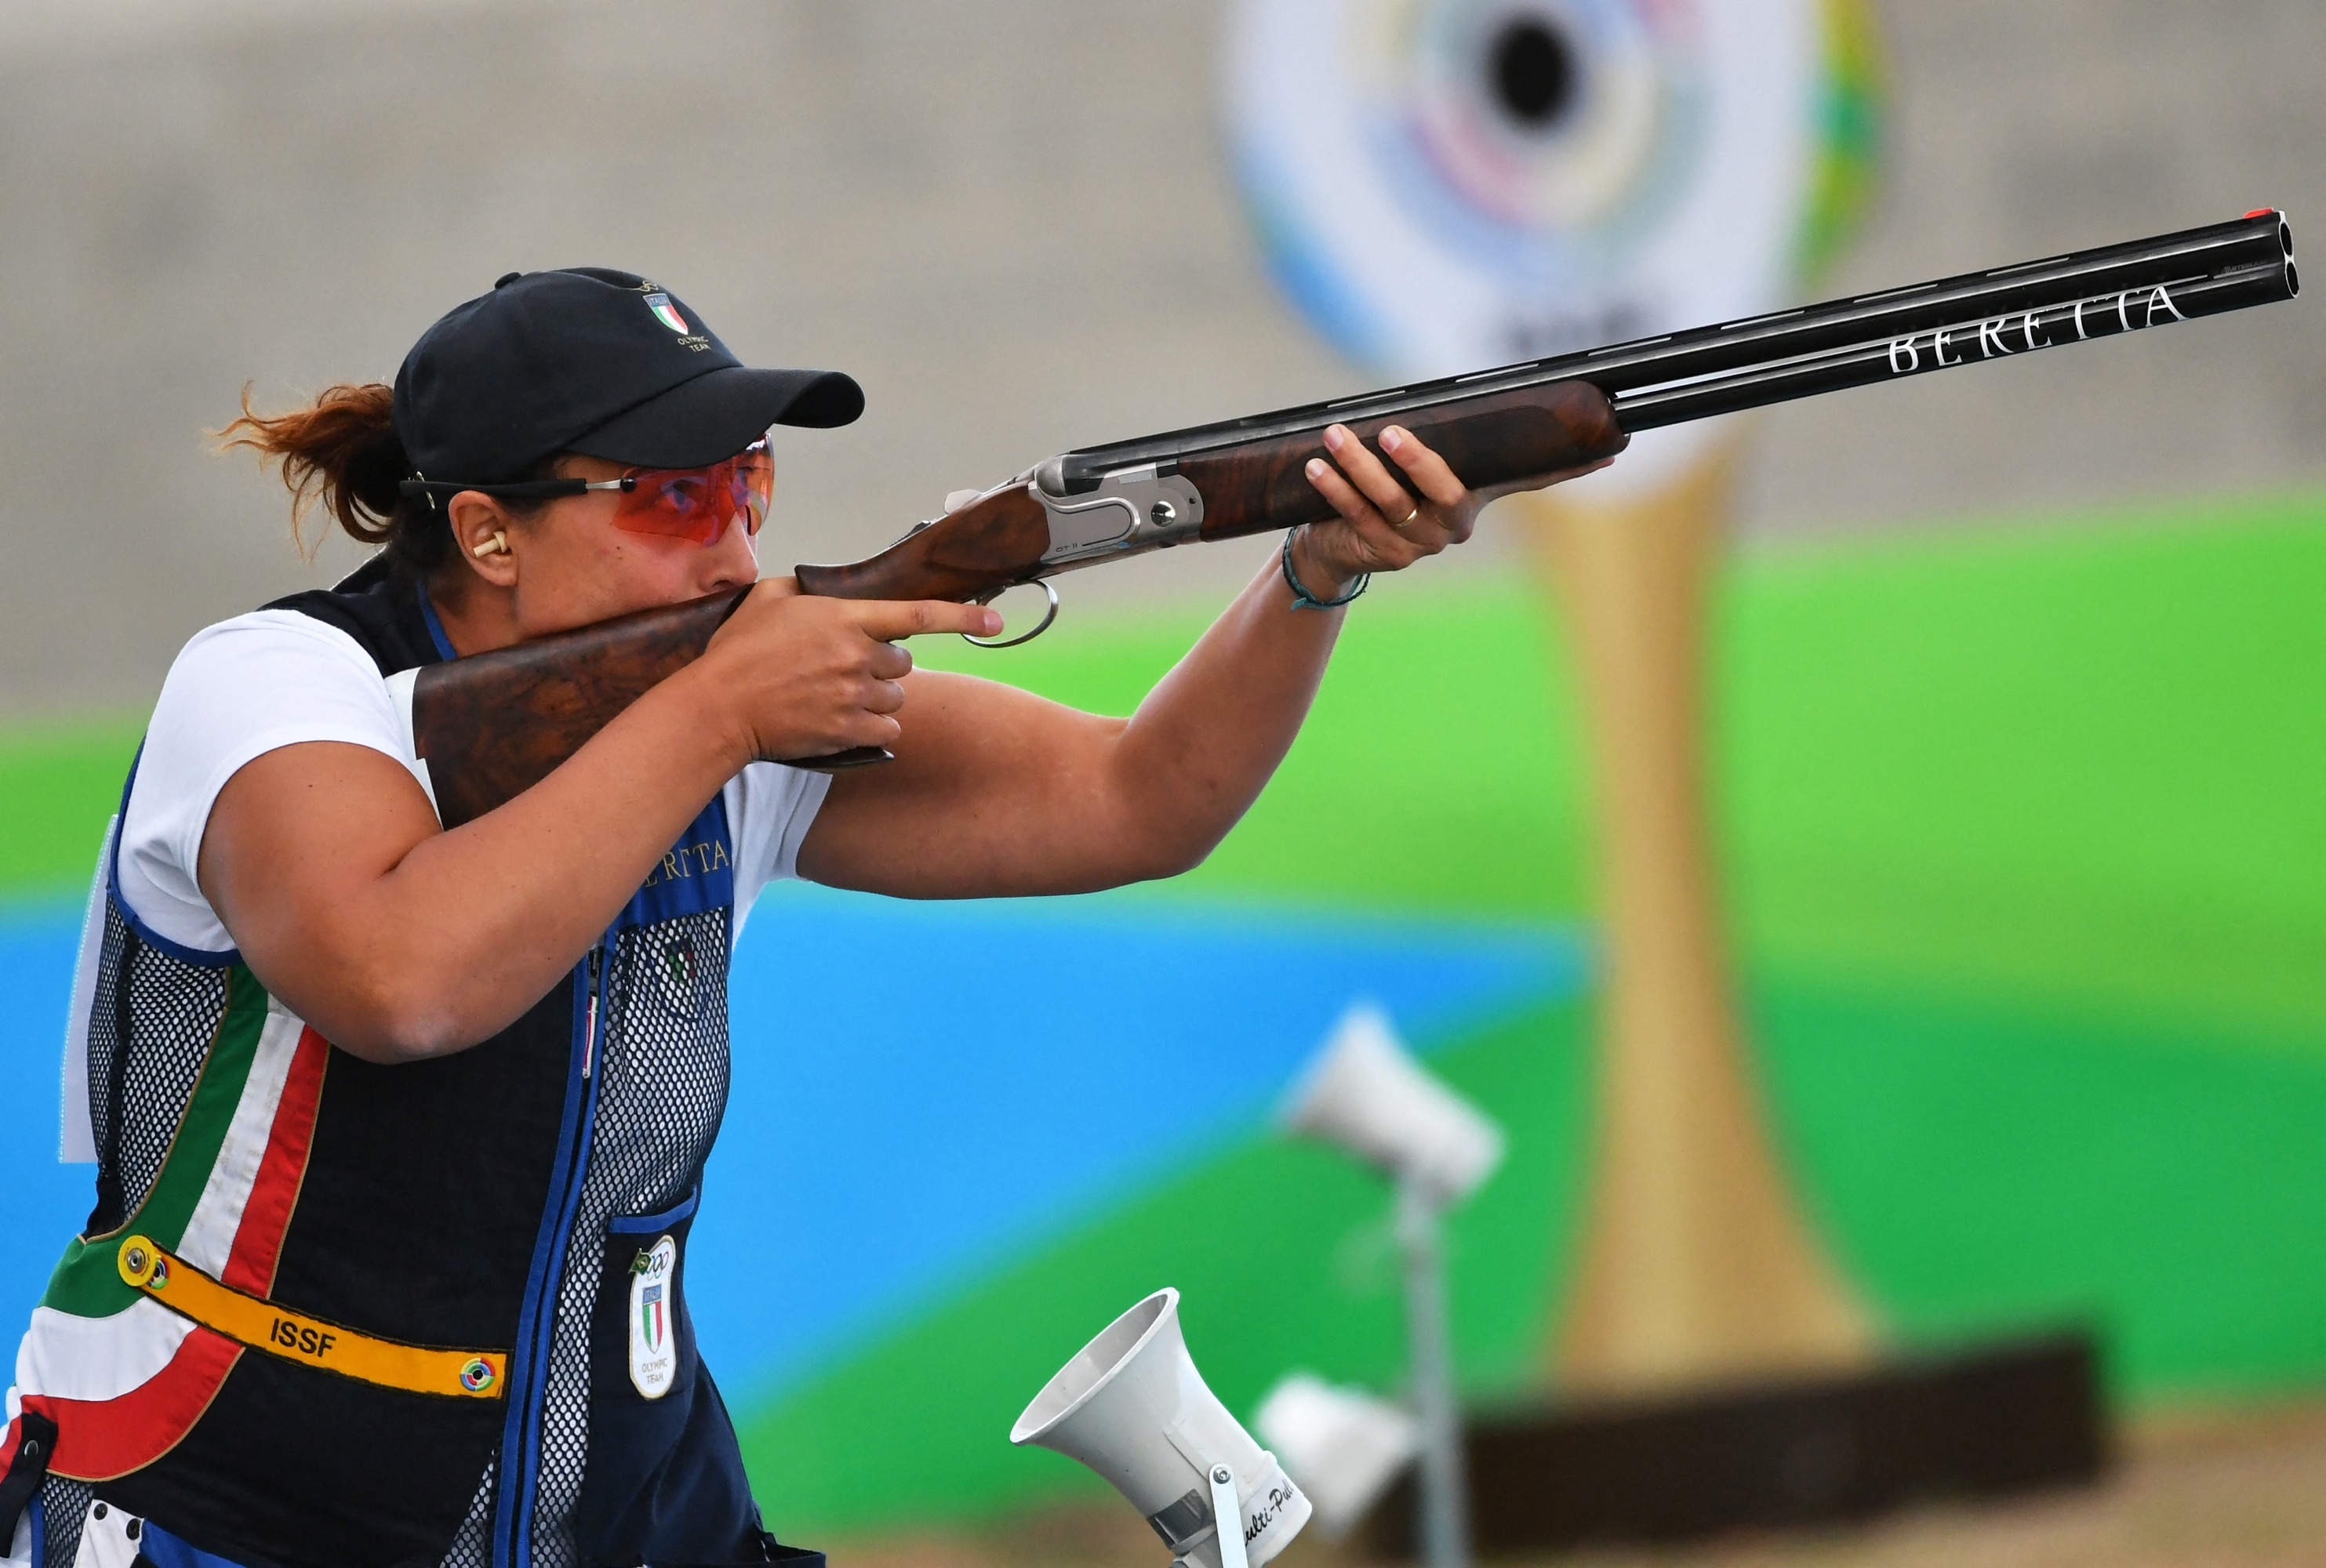 Gold medal winner Italy's Diana Bacosi competes during the Skeet Women's Finals shooting event at the Rio 2016 Olympic Games at the Olympic Shooting Centre in Rio de Janeiro on August 12, 2016. (Photo by PASCAL GUYOT / AFP)